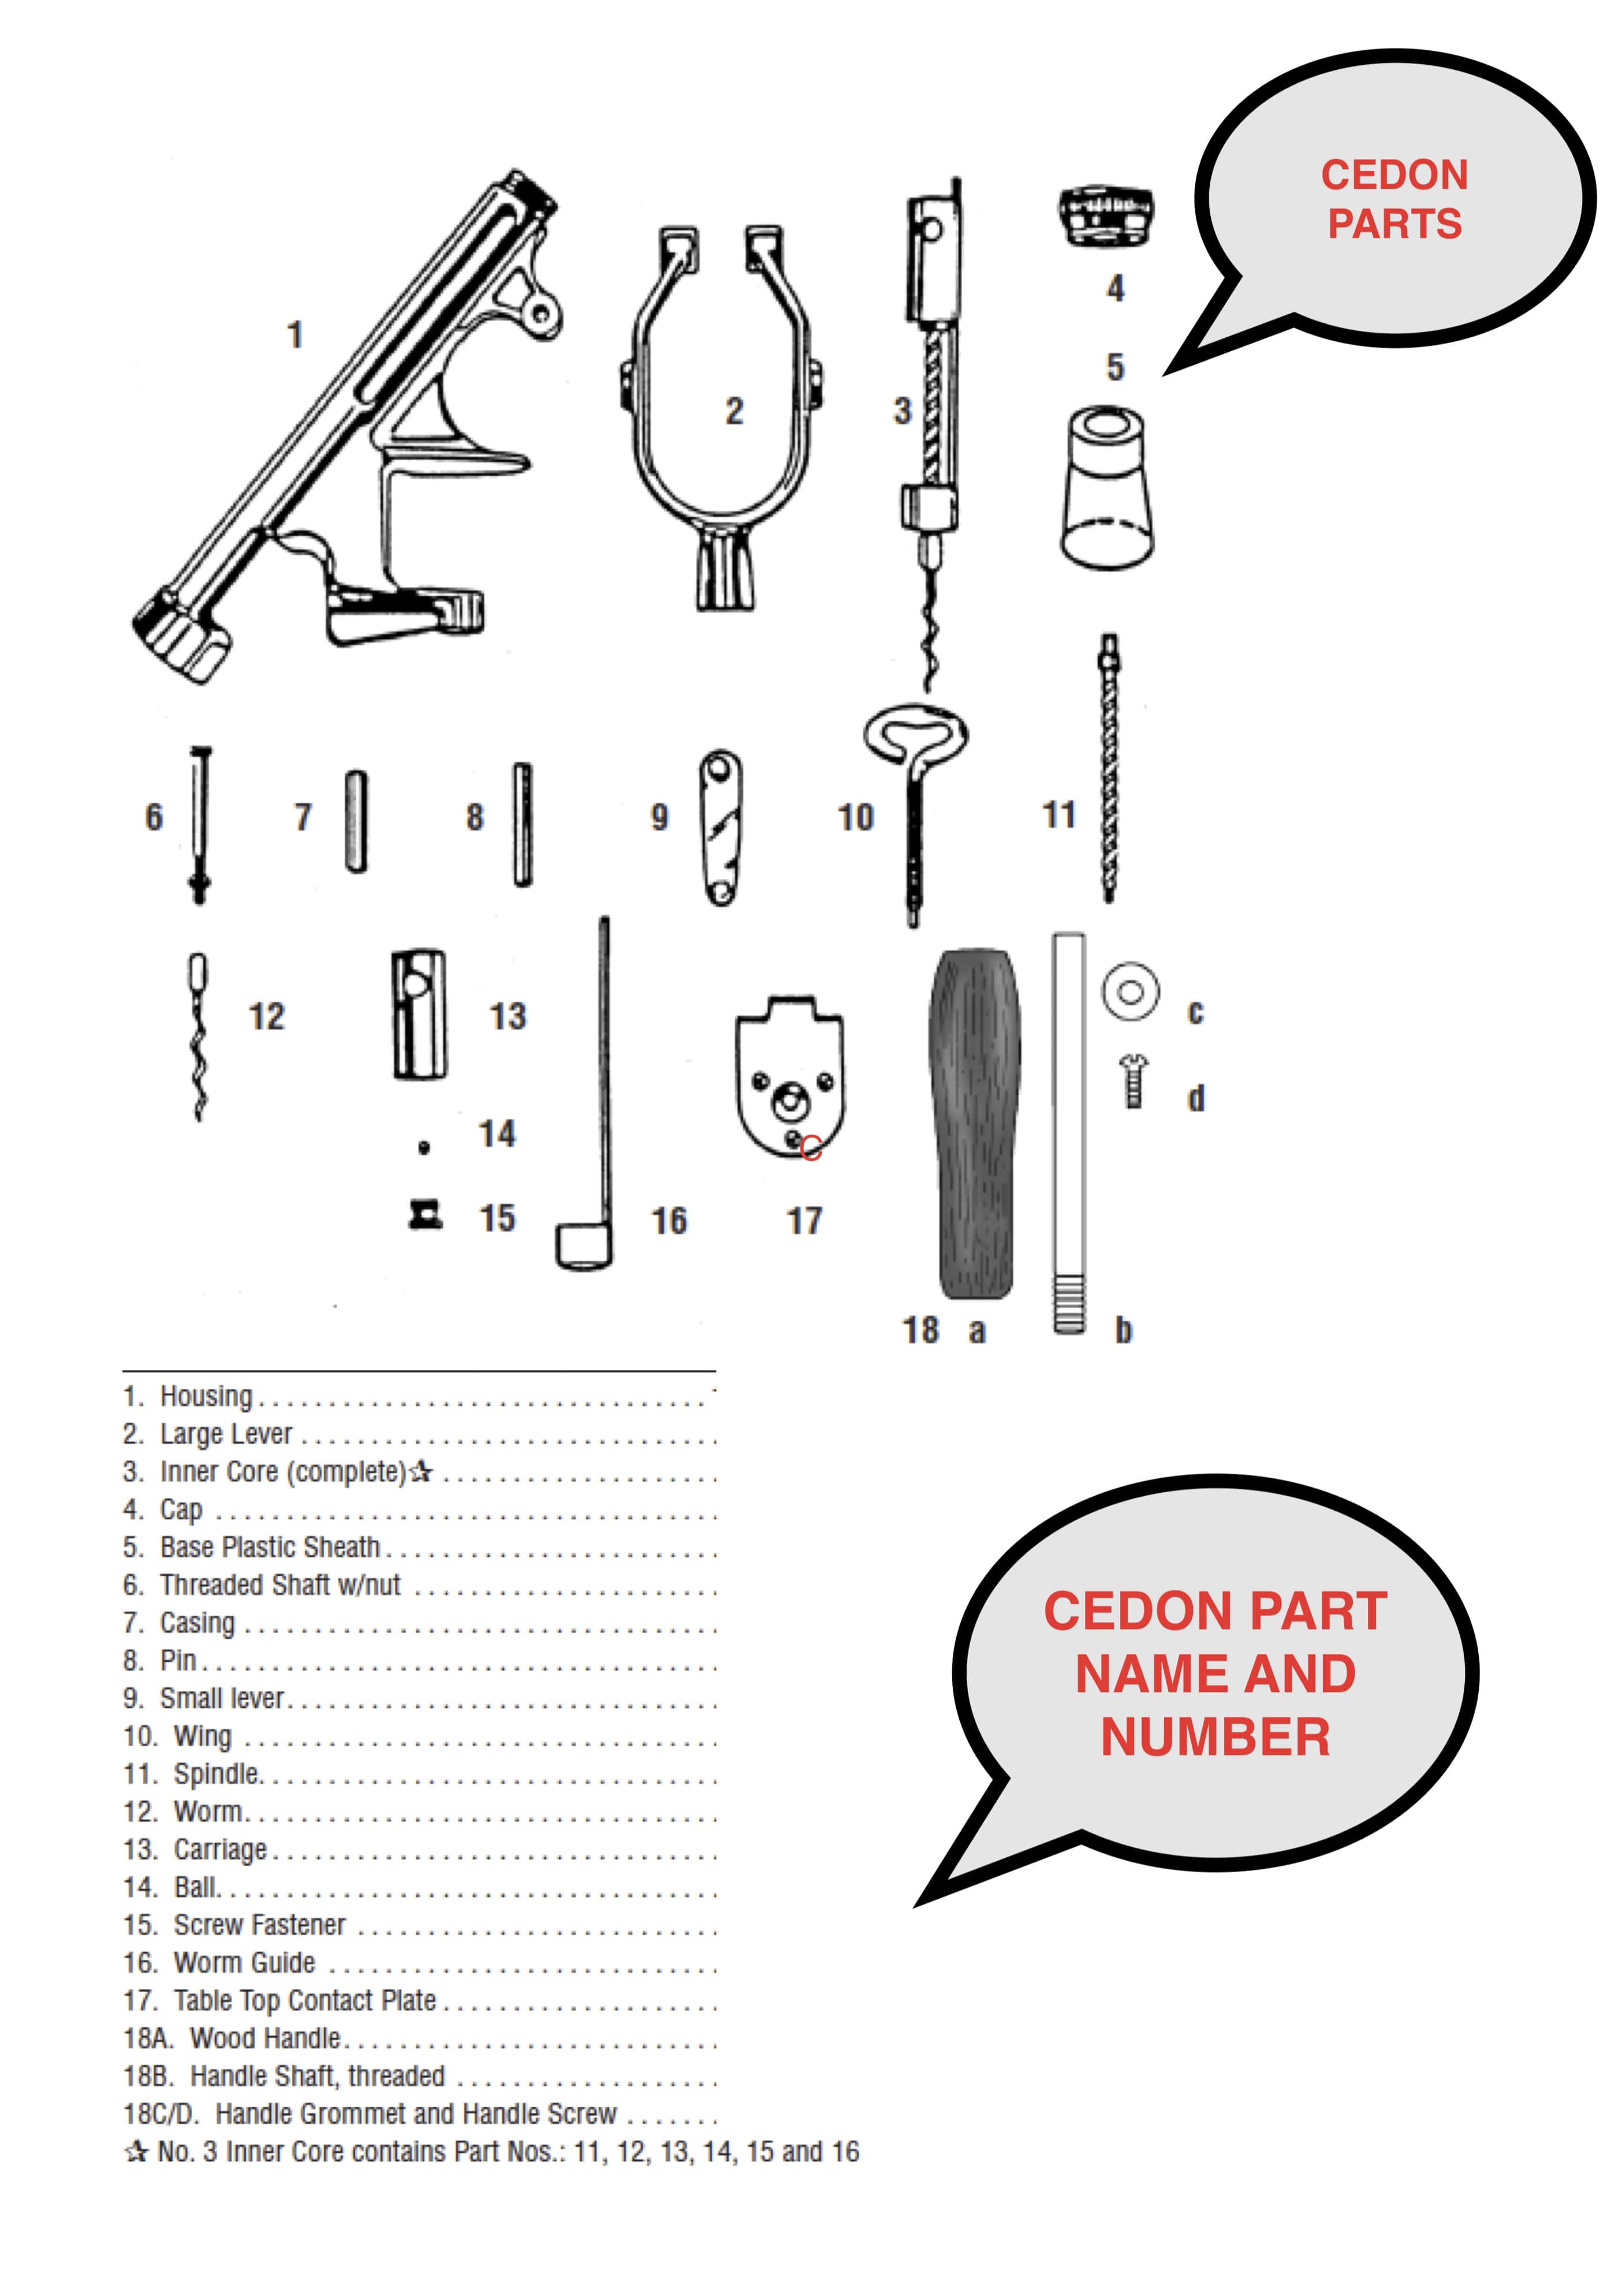 Review all the available replacement parts for Cedon